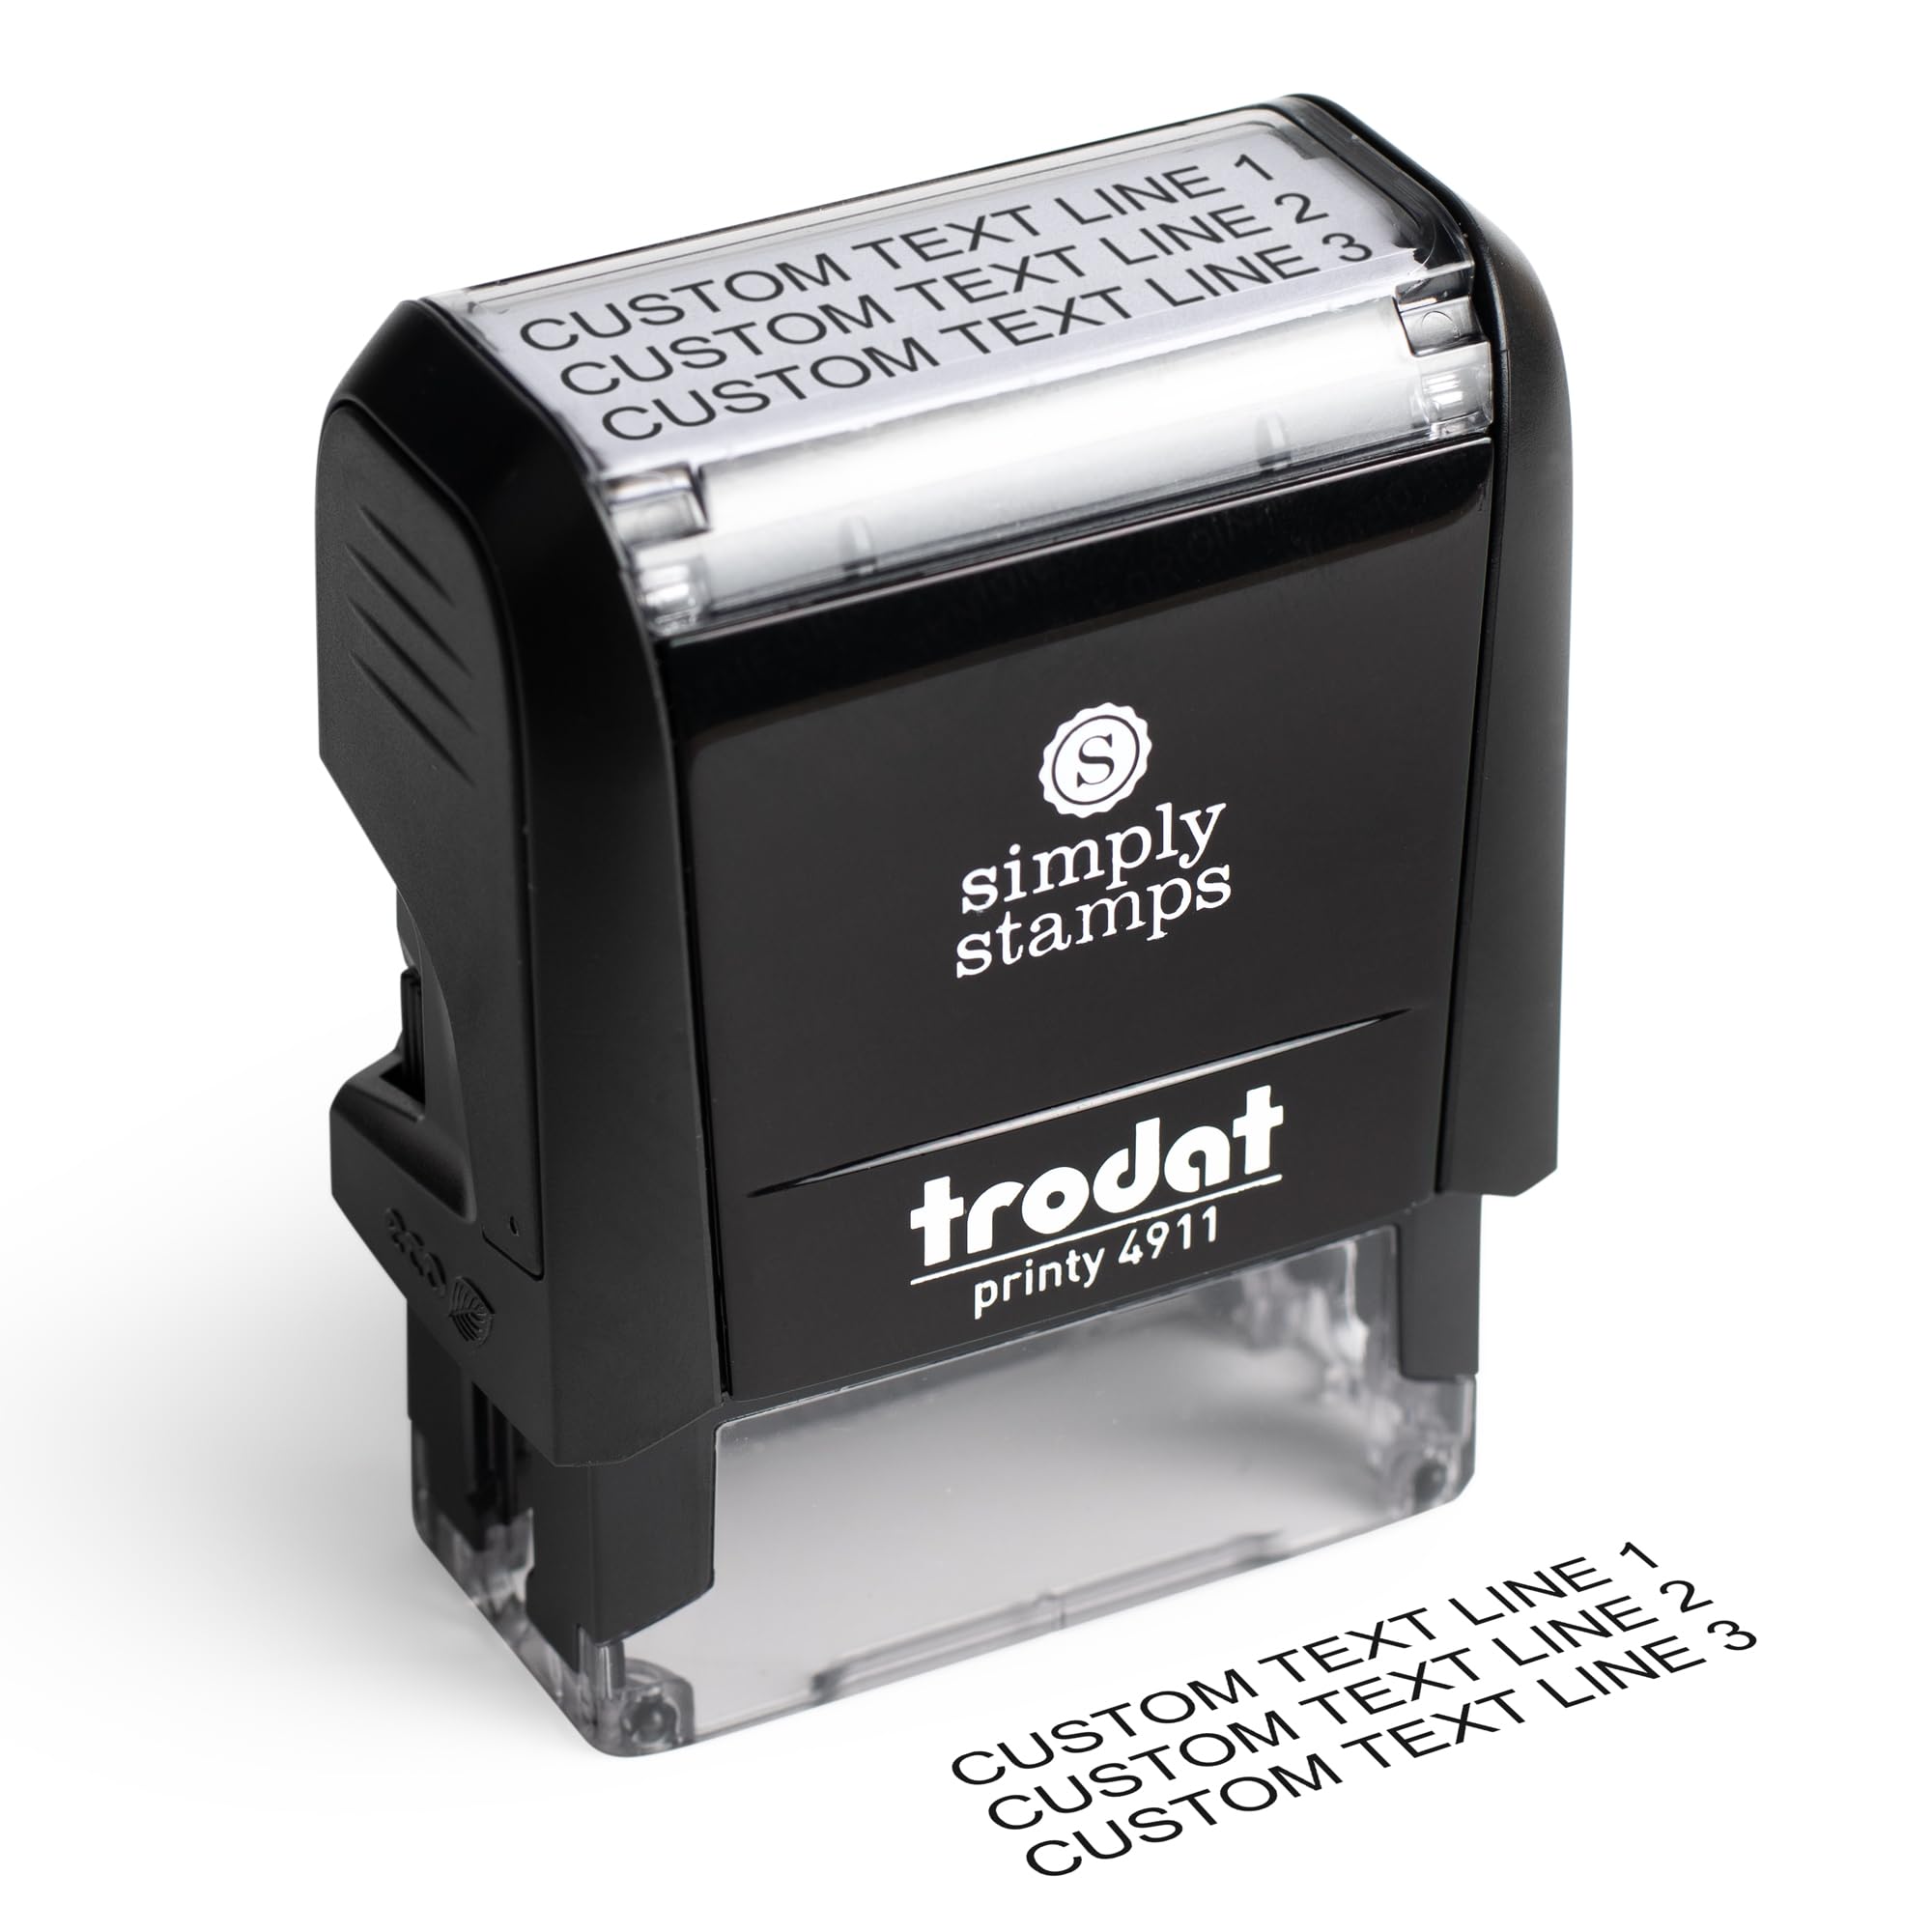 904 Custom 3LineFonts Custom Address Stamp - 20 Font Options - 3 Line  Self-Inking Address Stamp - Up to 3 Lines of Customized Text